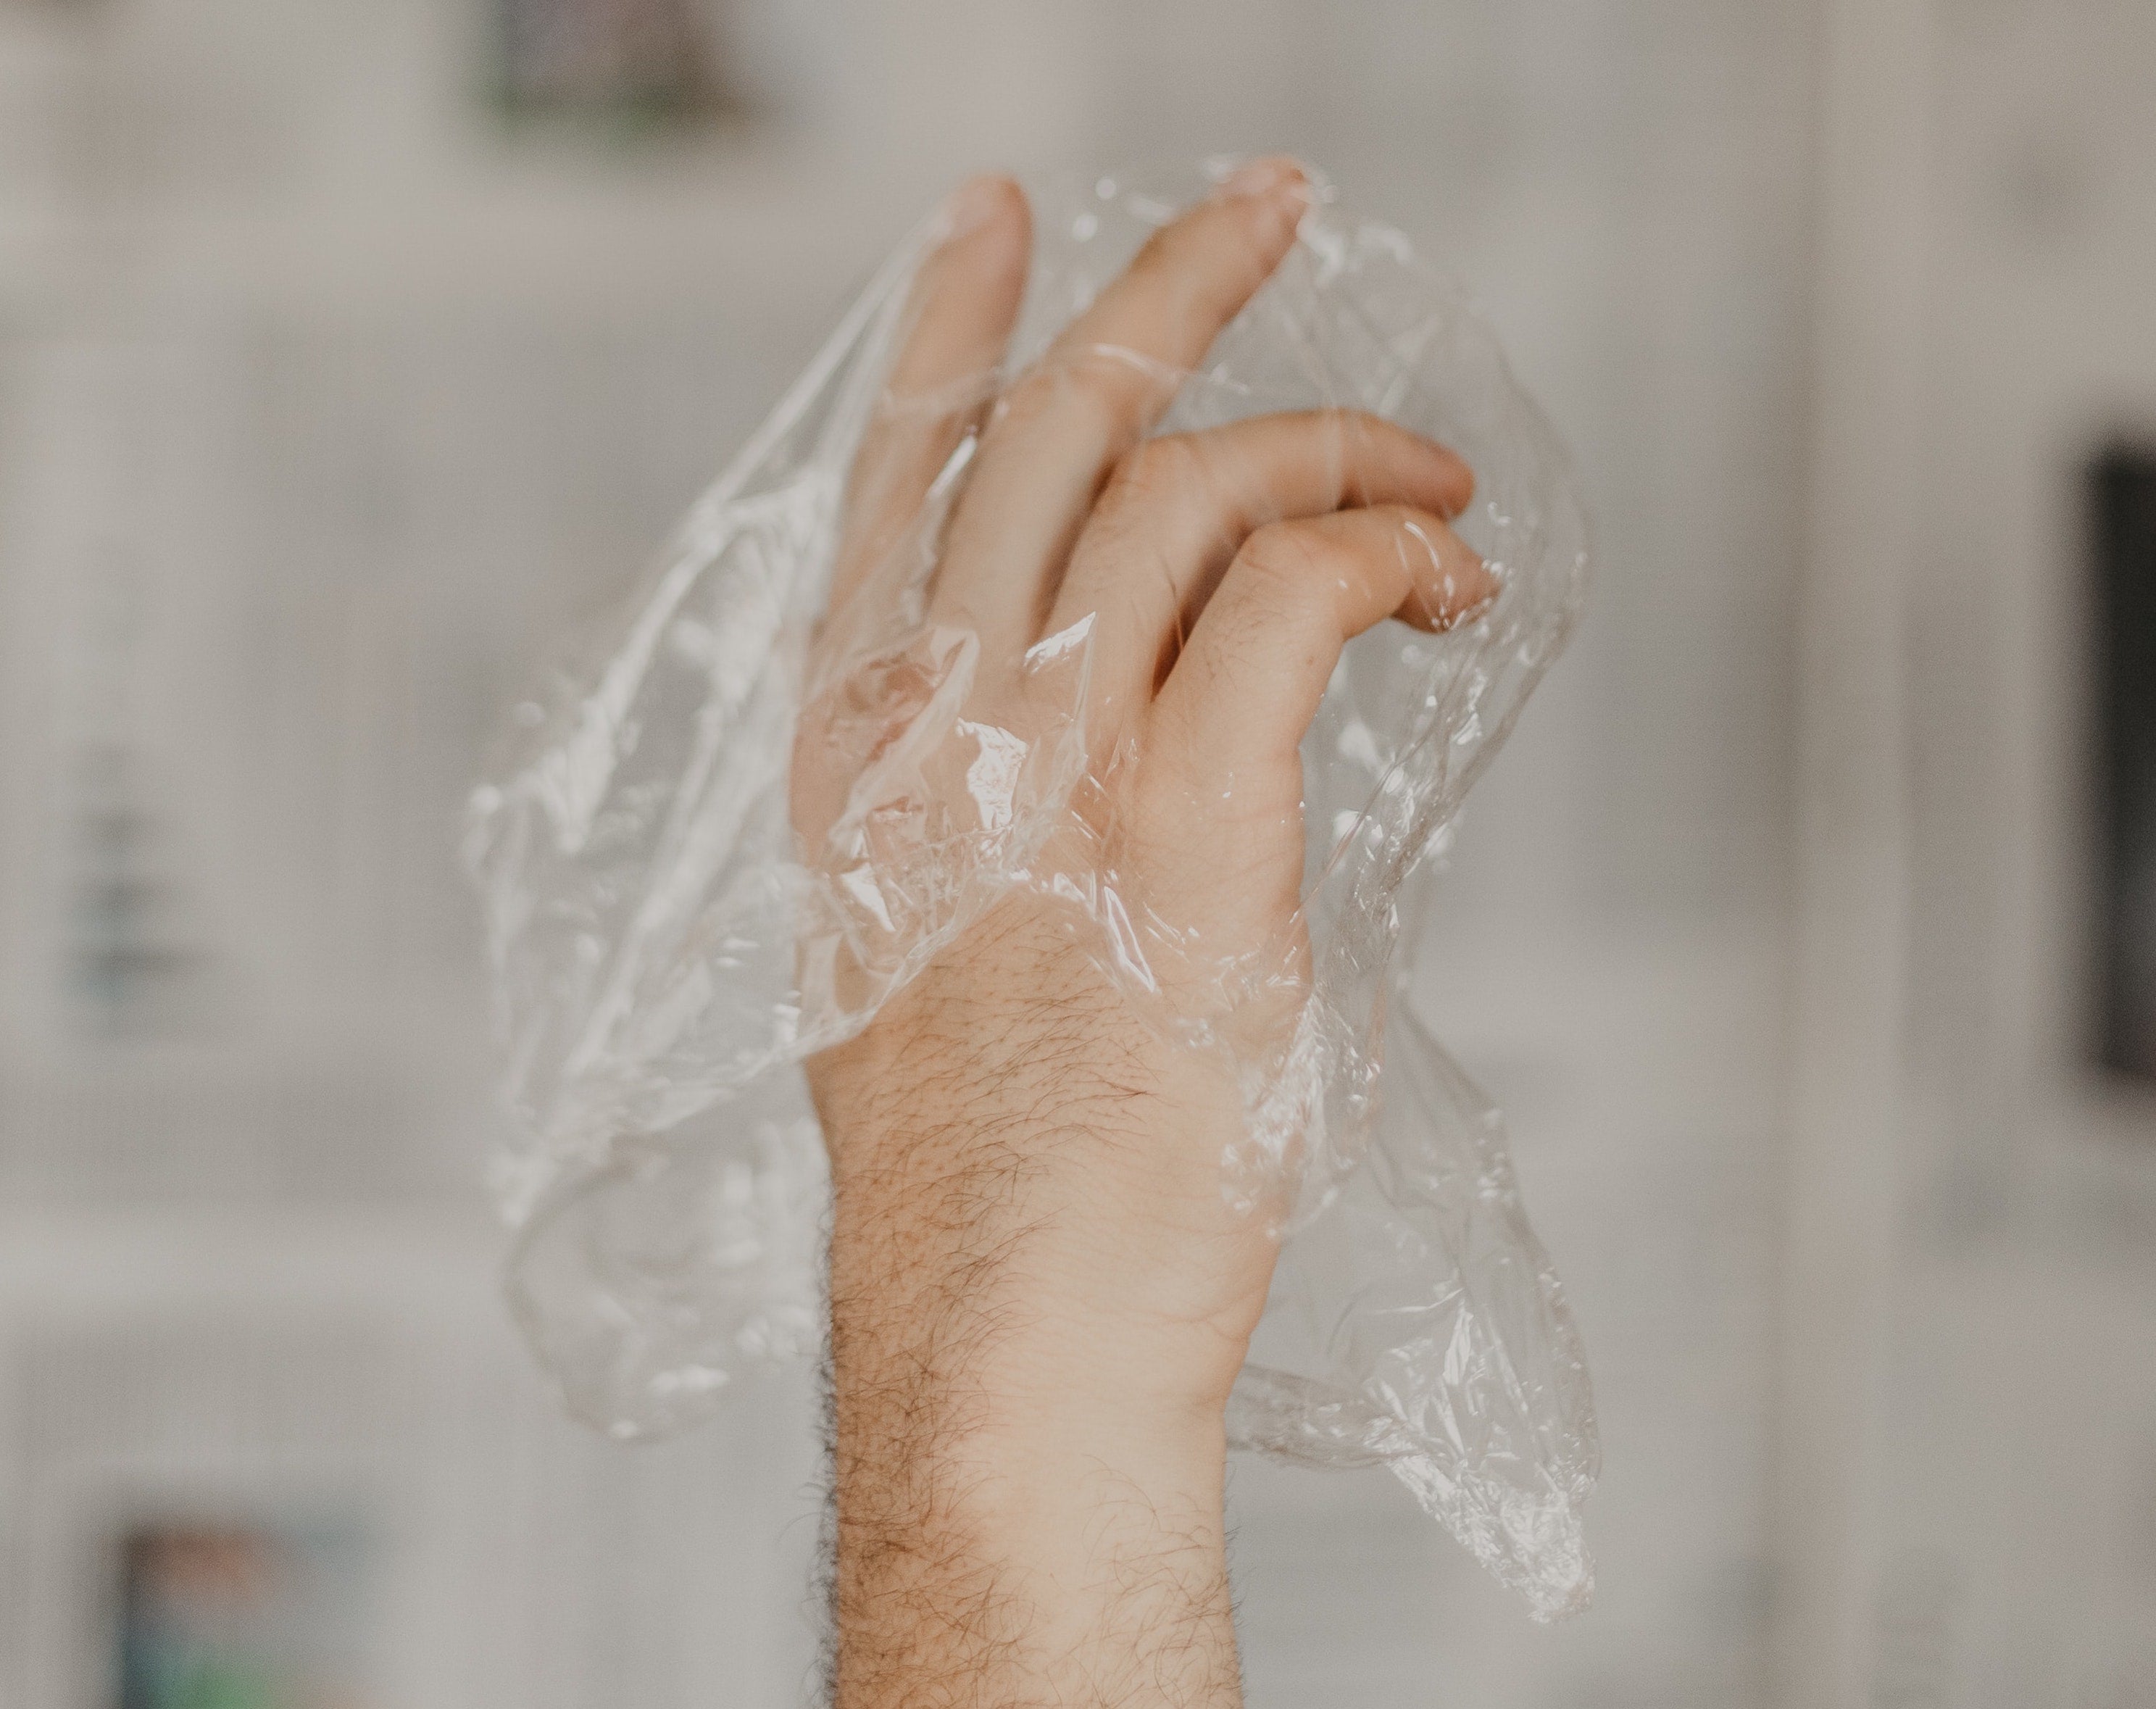 Dainty hand in a plastic bag